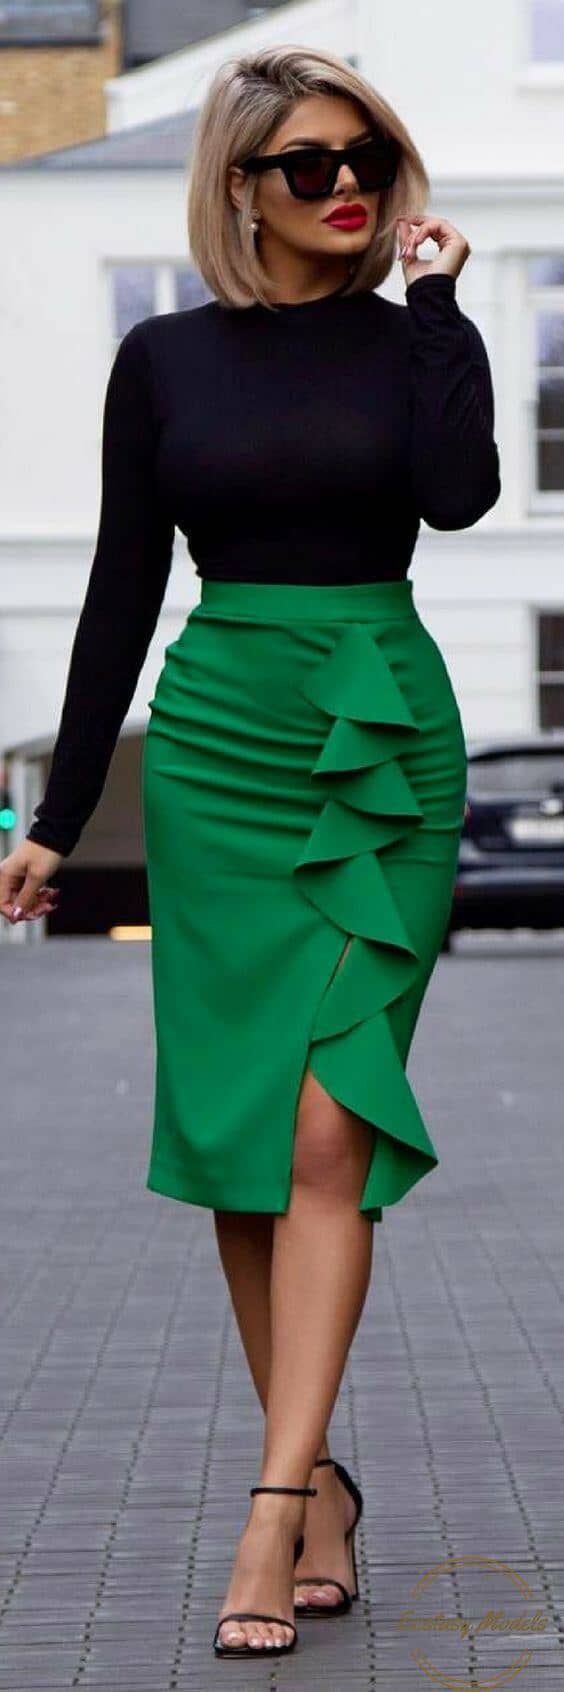 You Can Never Go Wrong With A Colorful Pencil Skirt